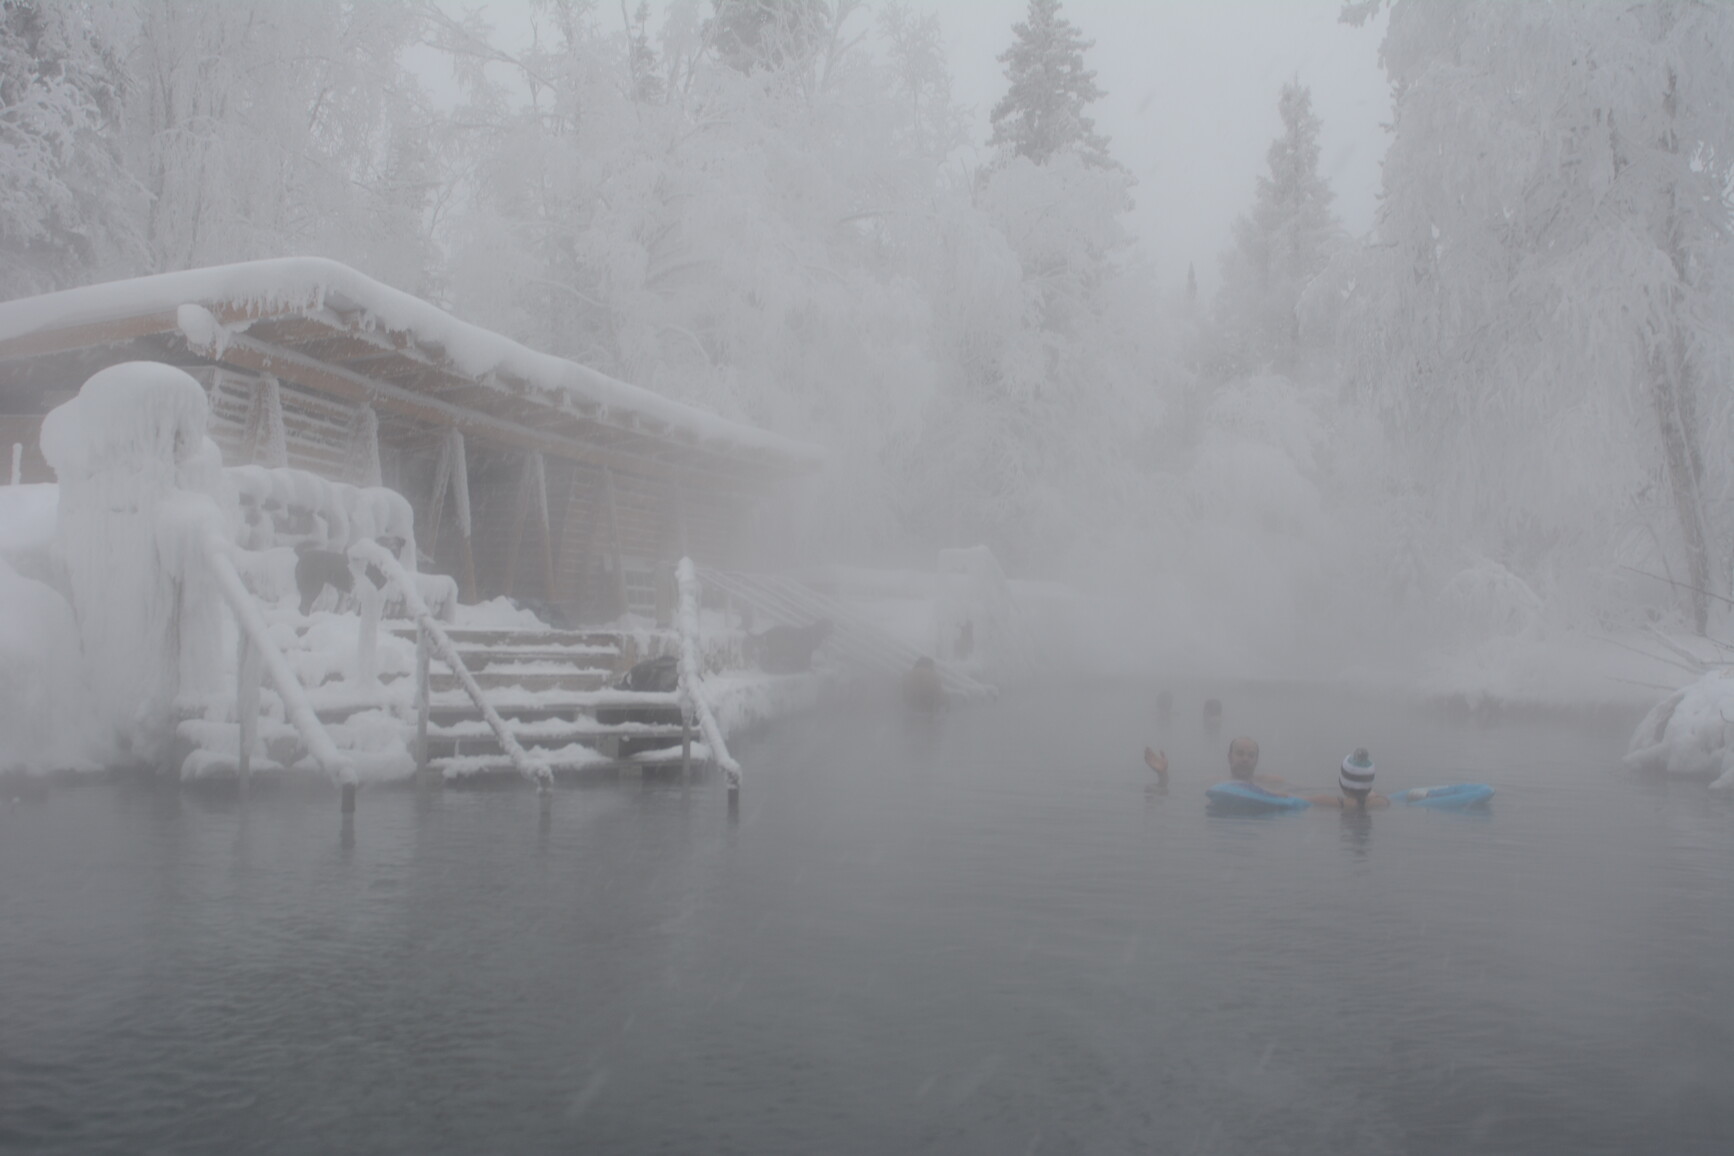 Laird River Hot Springs facility. Park visitors are swimming in the hot springs. There is heavy frost covering the trees surrounding the hot springs and building.